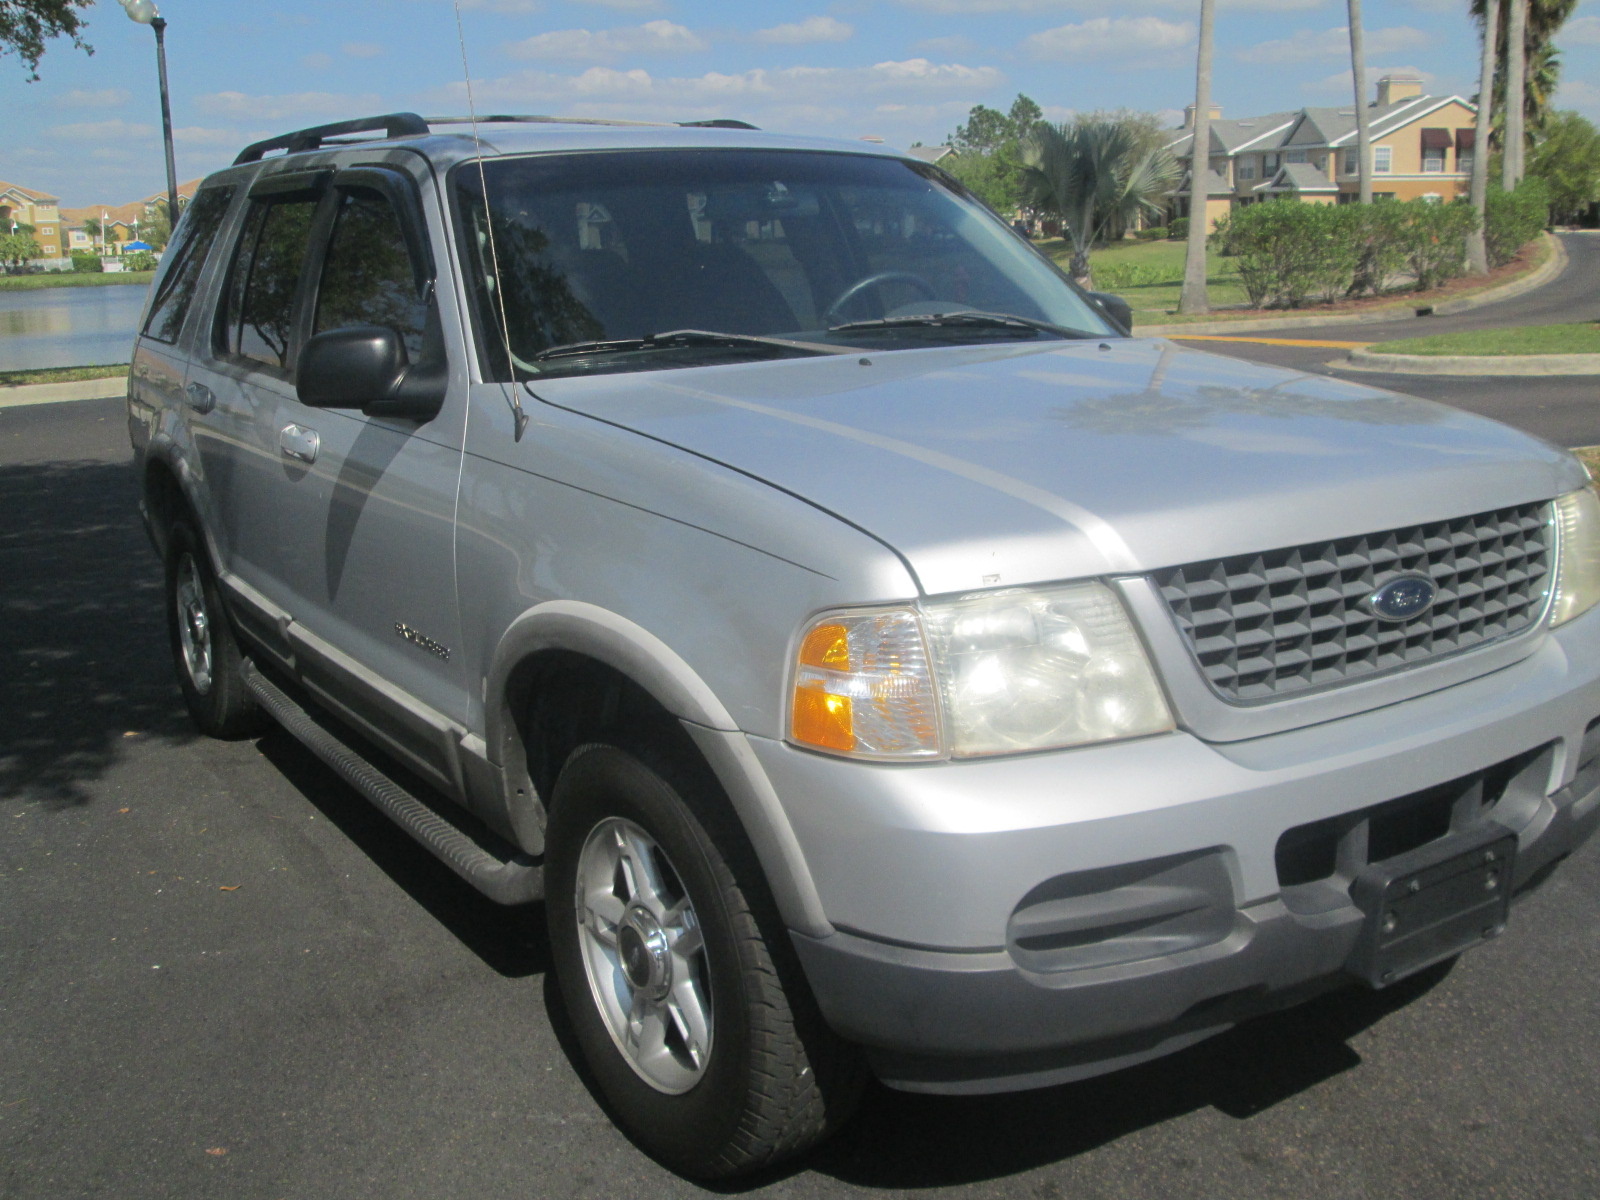 2002 Ford explorer limited reviews #1